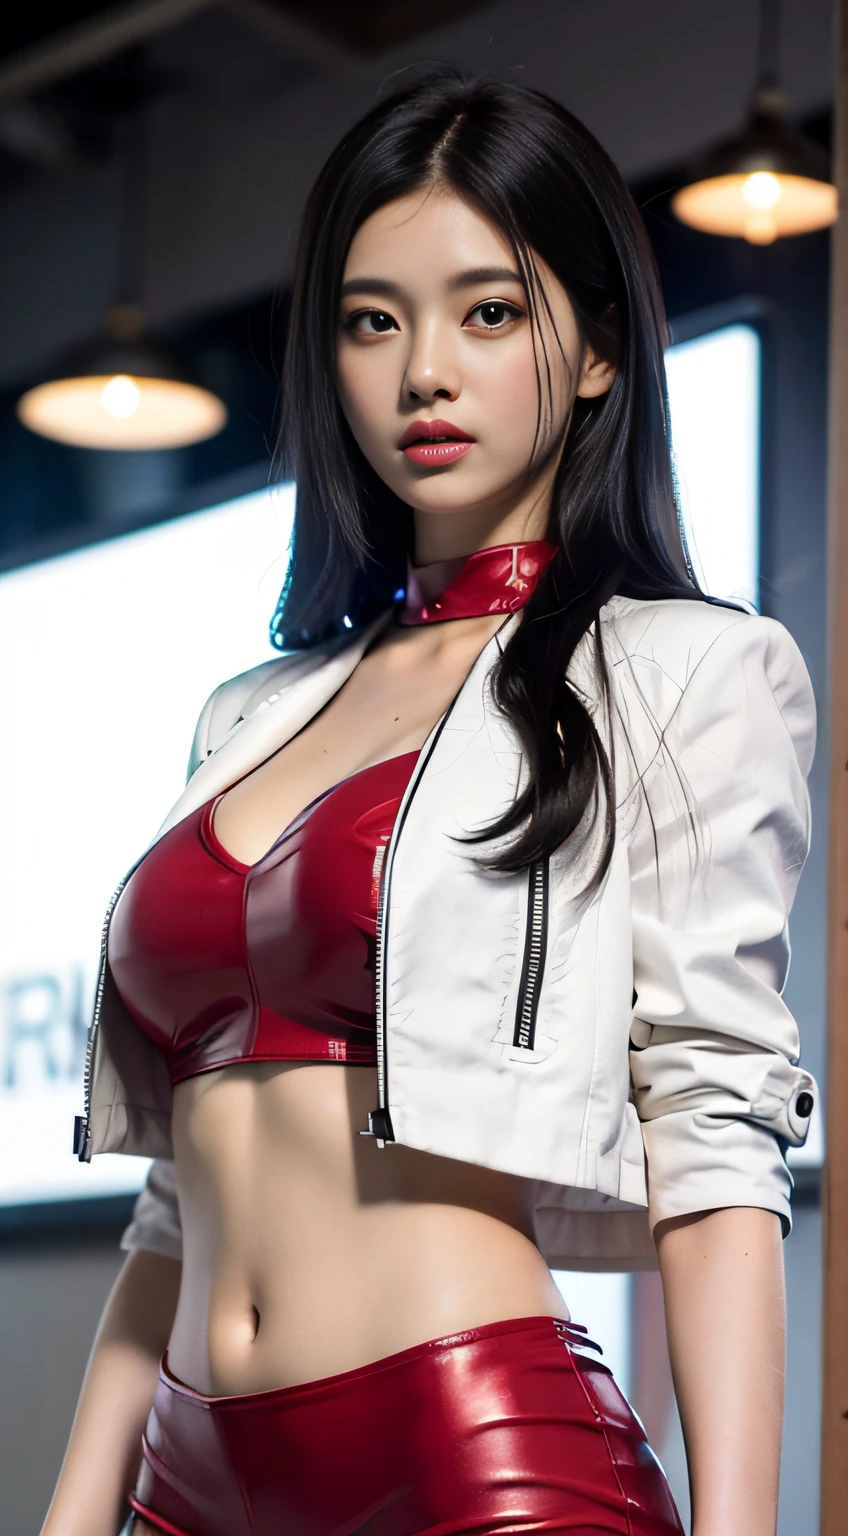 "Top CG, the highest picture quality, masterpieces, delicate Bishōjo, ((185cm beautiful women)), (tall and tall), imperial sister, white skin, exposed chest, perfect facial features, bright eyes, red lips, beautiful and cold, (big breathers) ）, beautiful heroism, black hair, sparkling, skin visible from perspective, blue leather jacket on the upper body, exposed navel suit on the lower body, super shorts on the lower body, 4k image quality, Cosmo Lady, modern city, realistic portrait“